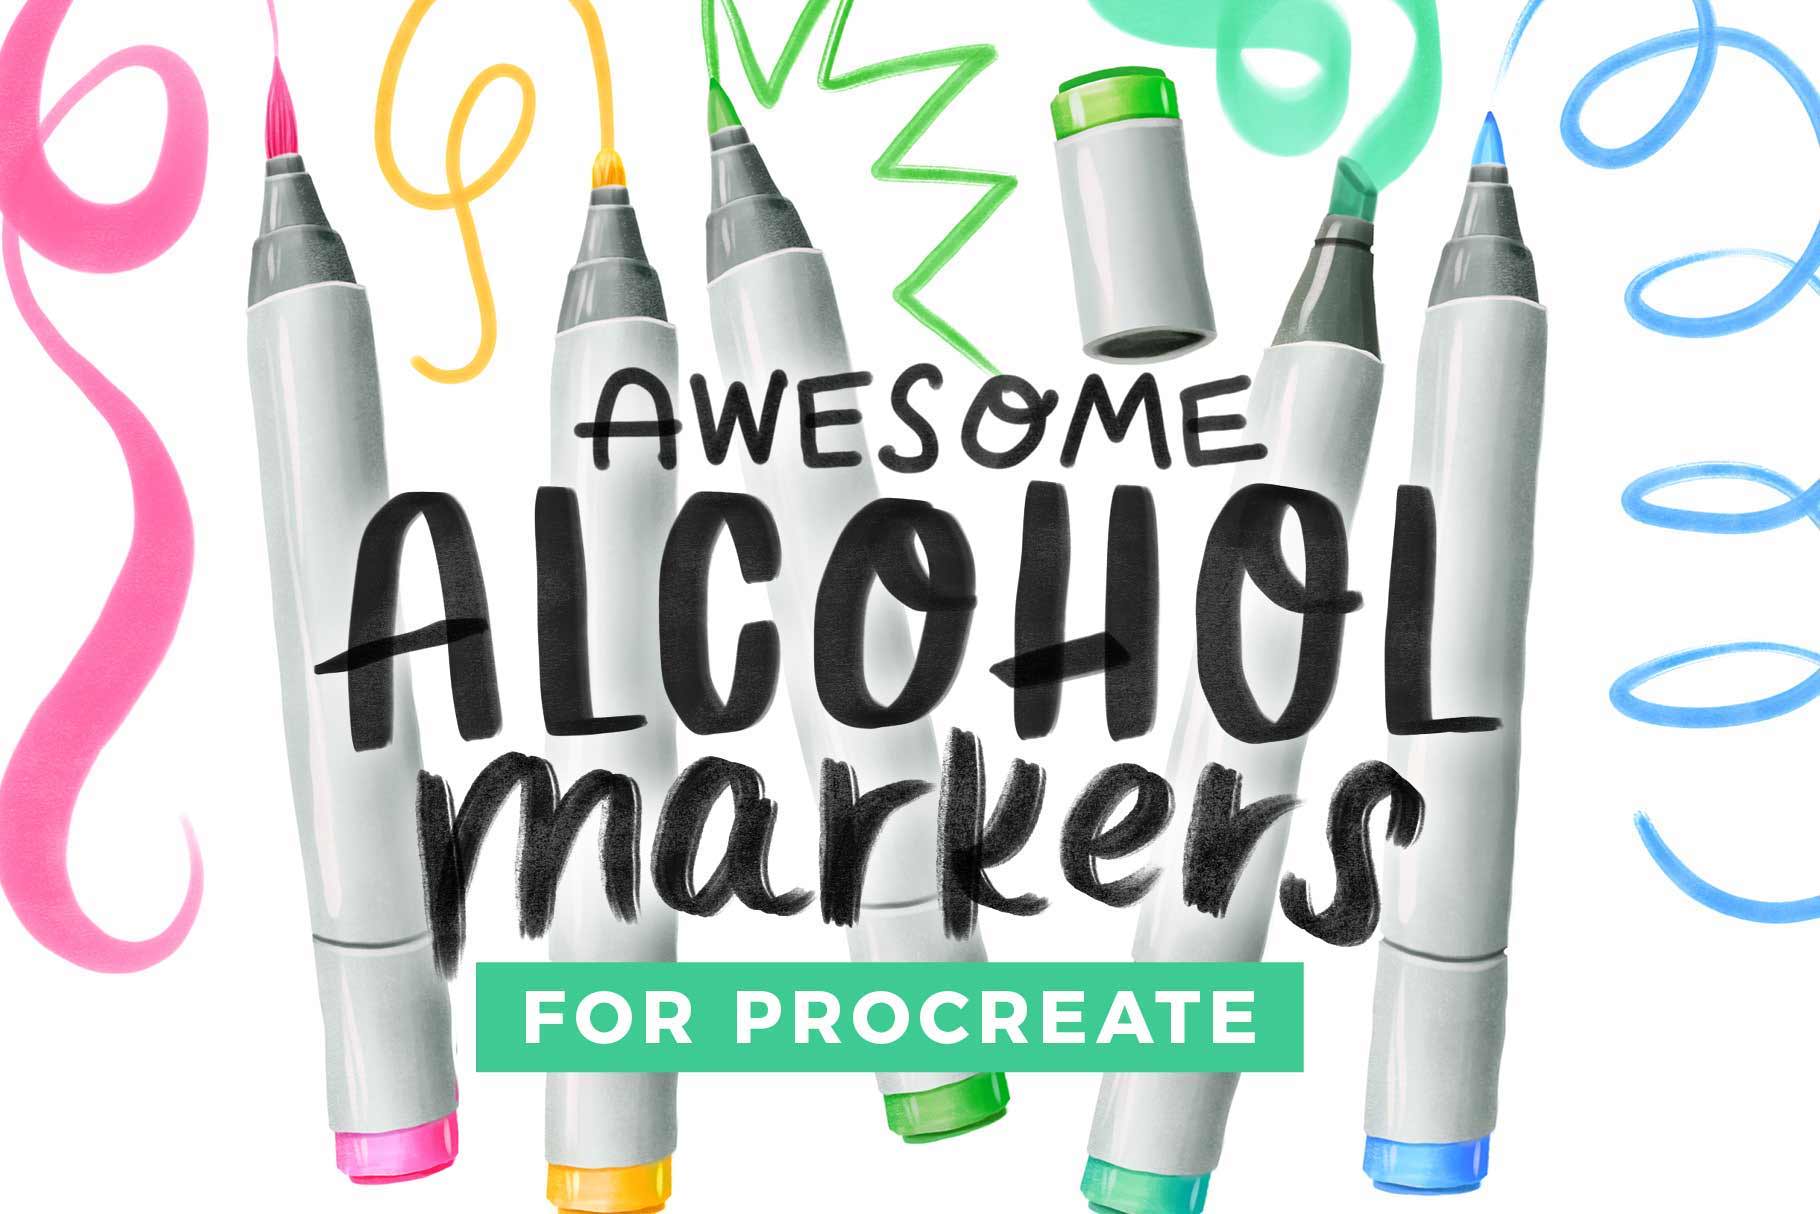 Awesome Alcohol Markers for Procreate by Bardot Brush